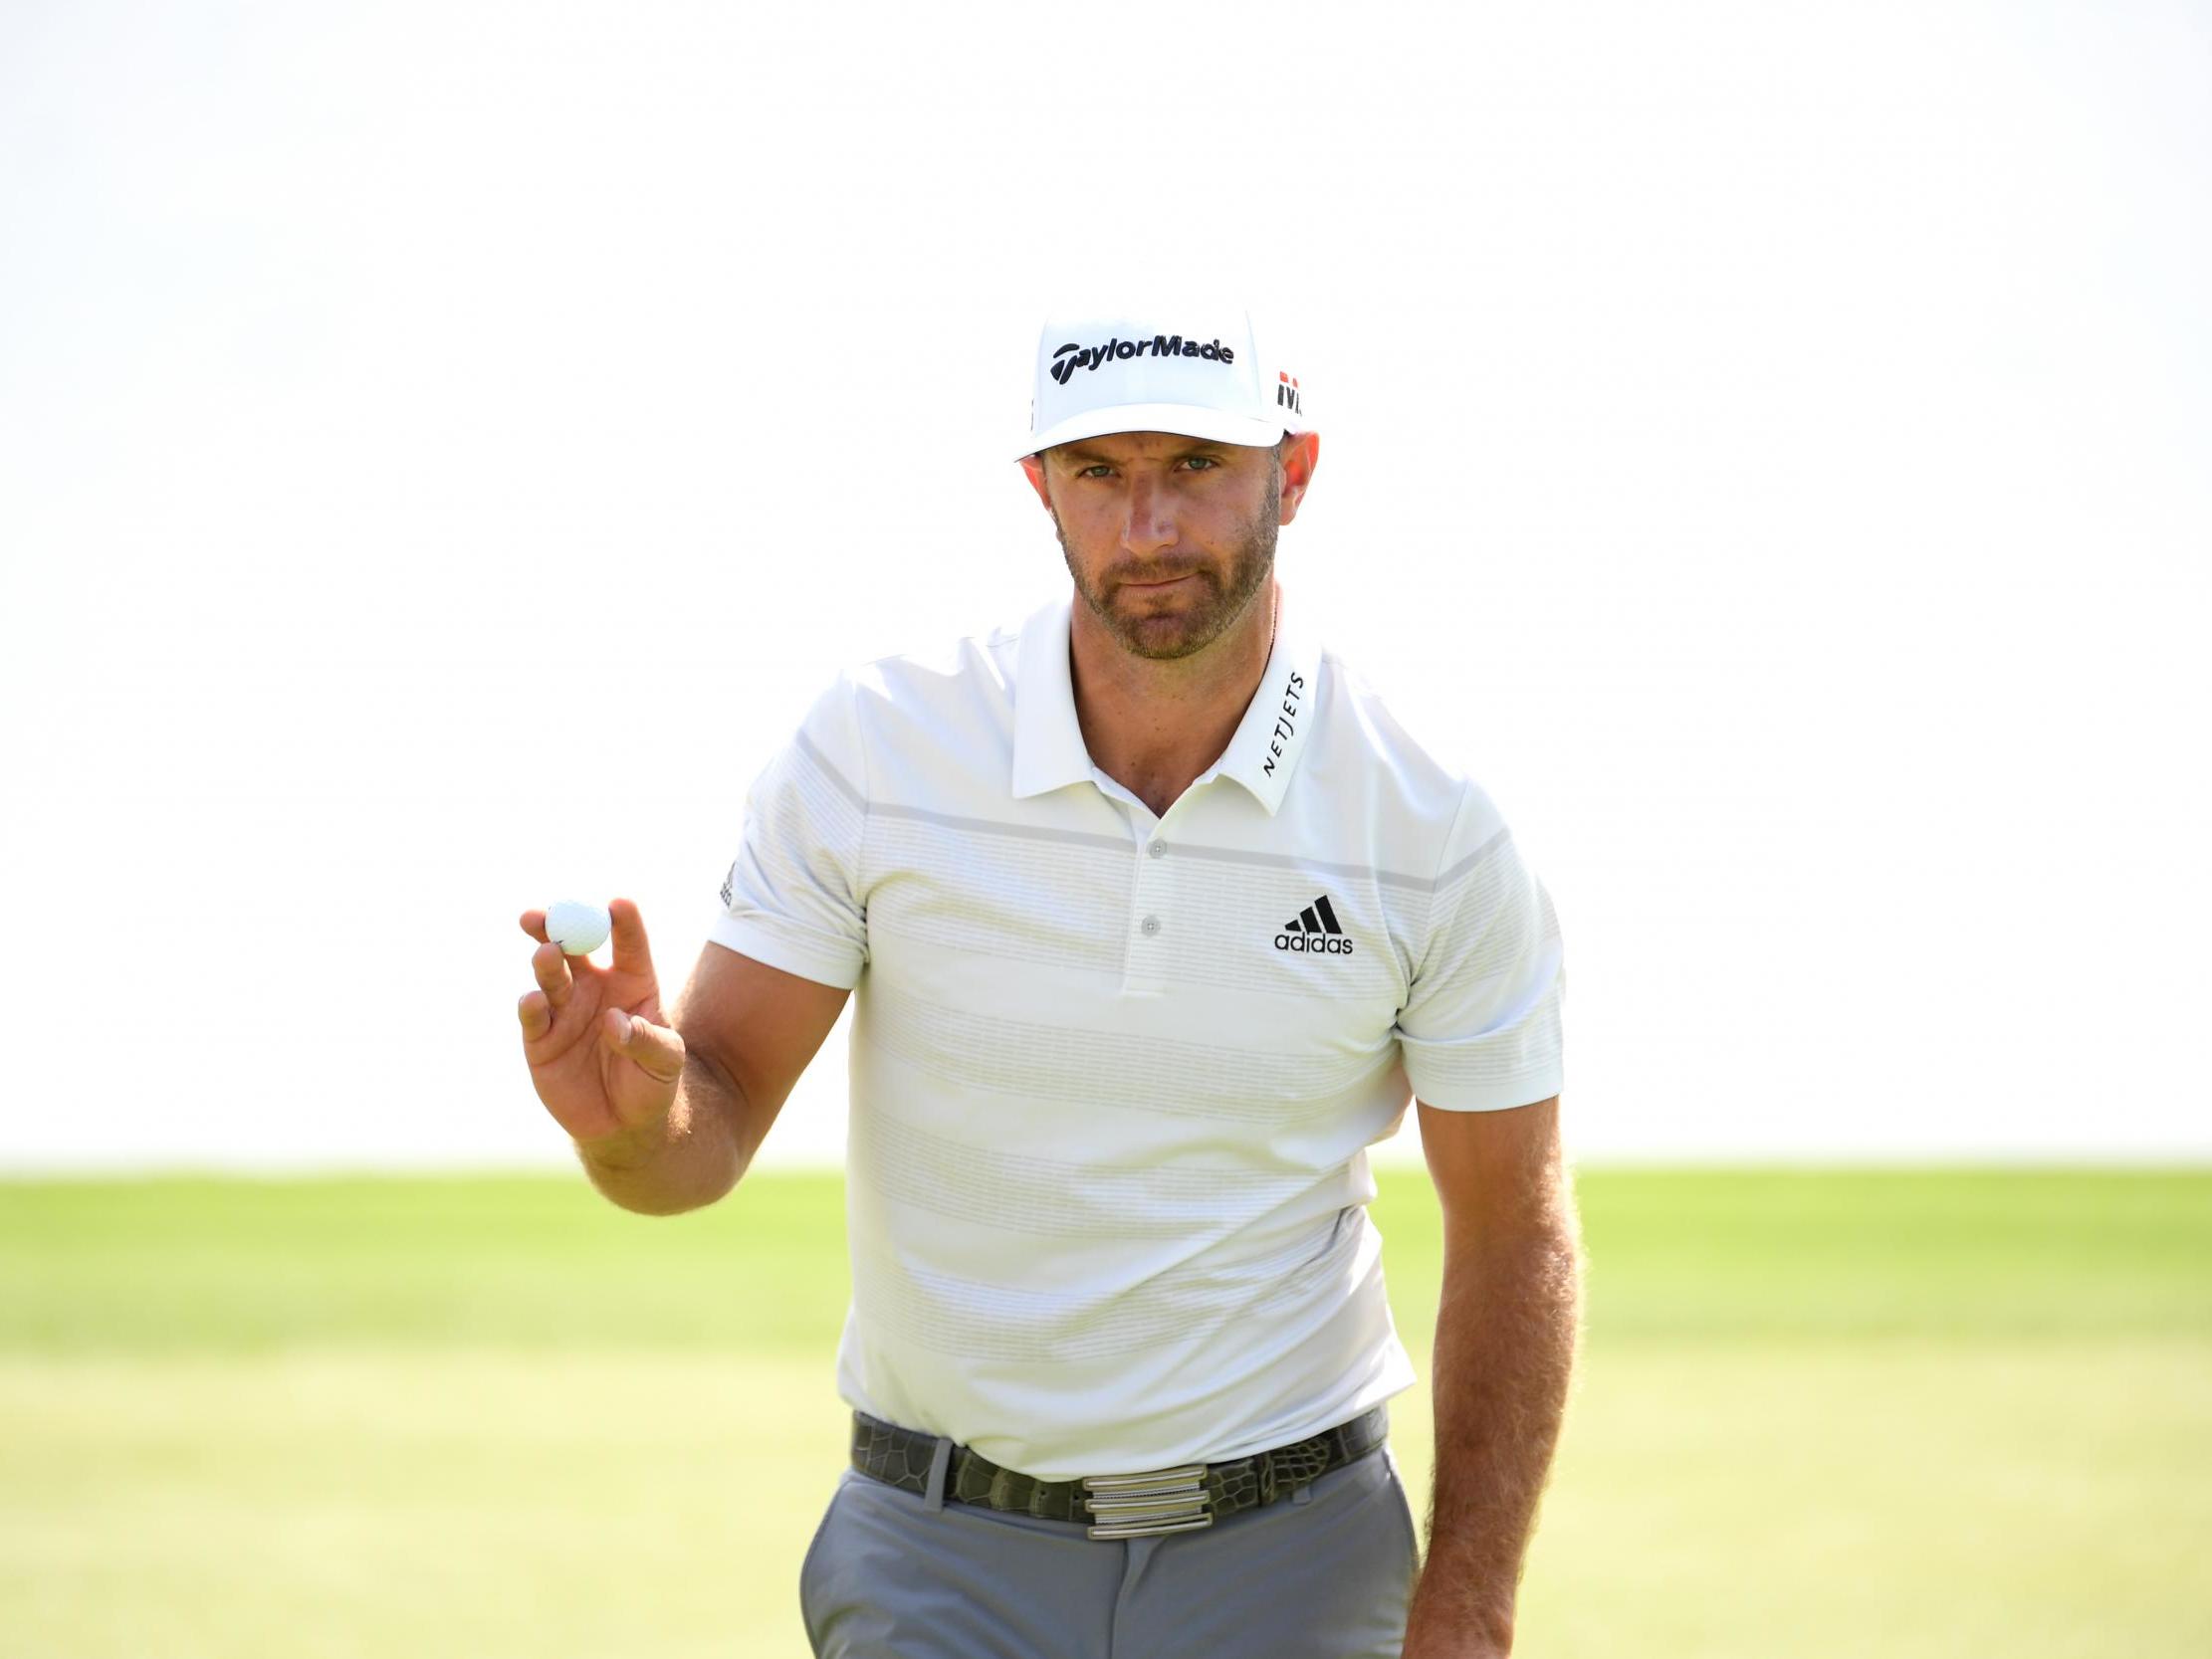 Dustin Johnson is the leading the field at the £2.6million event